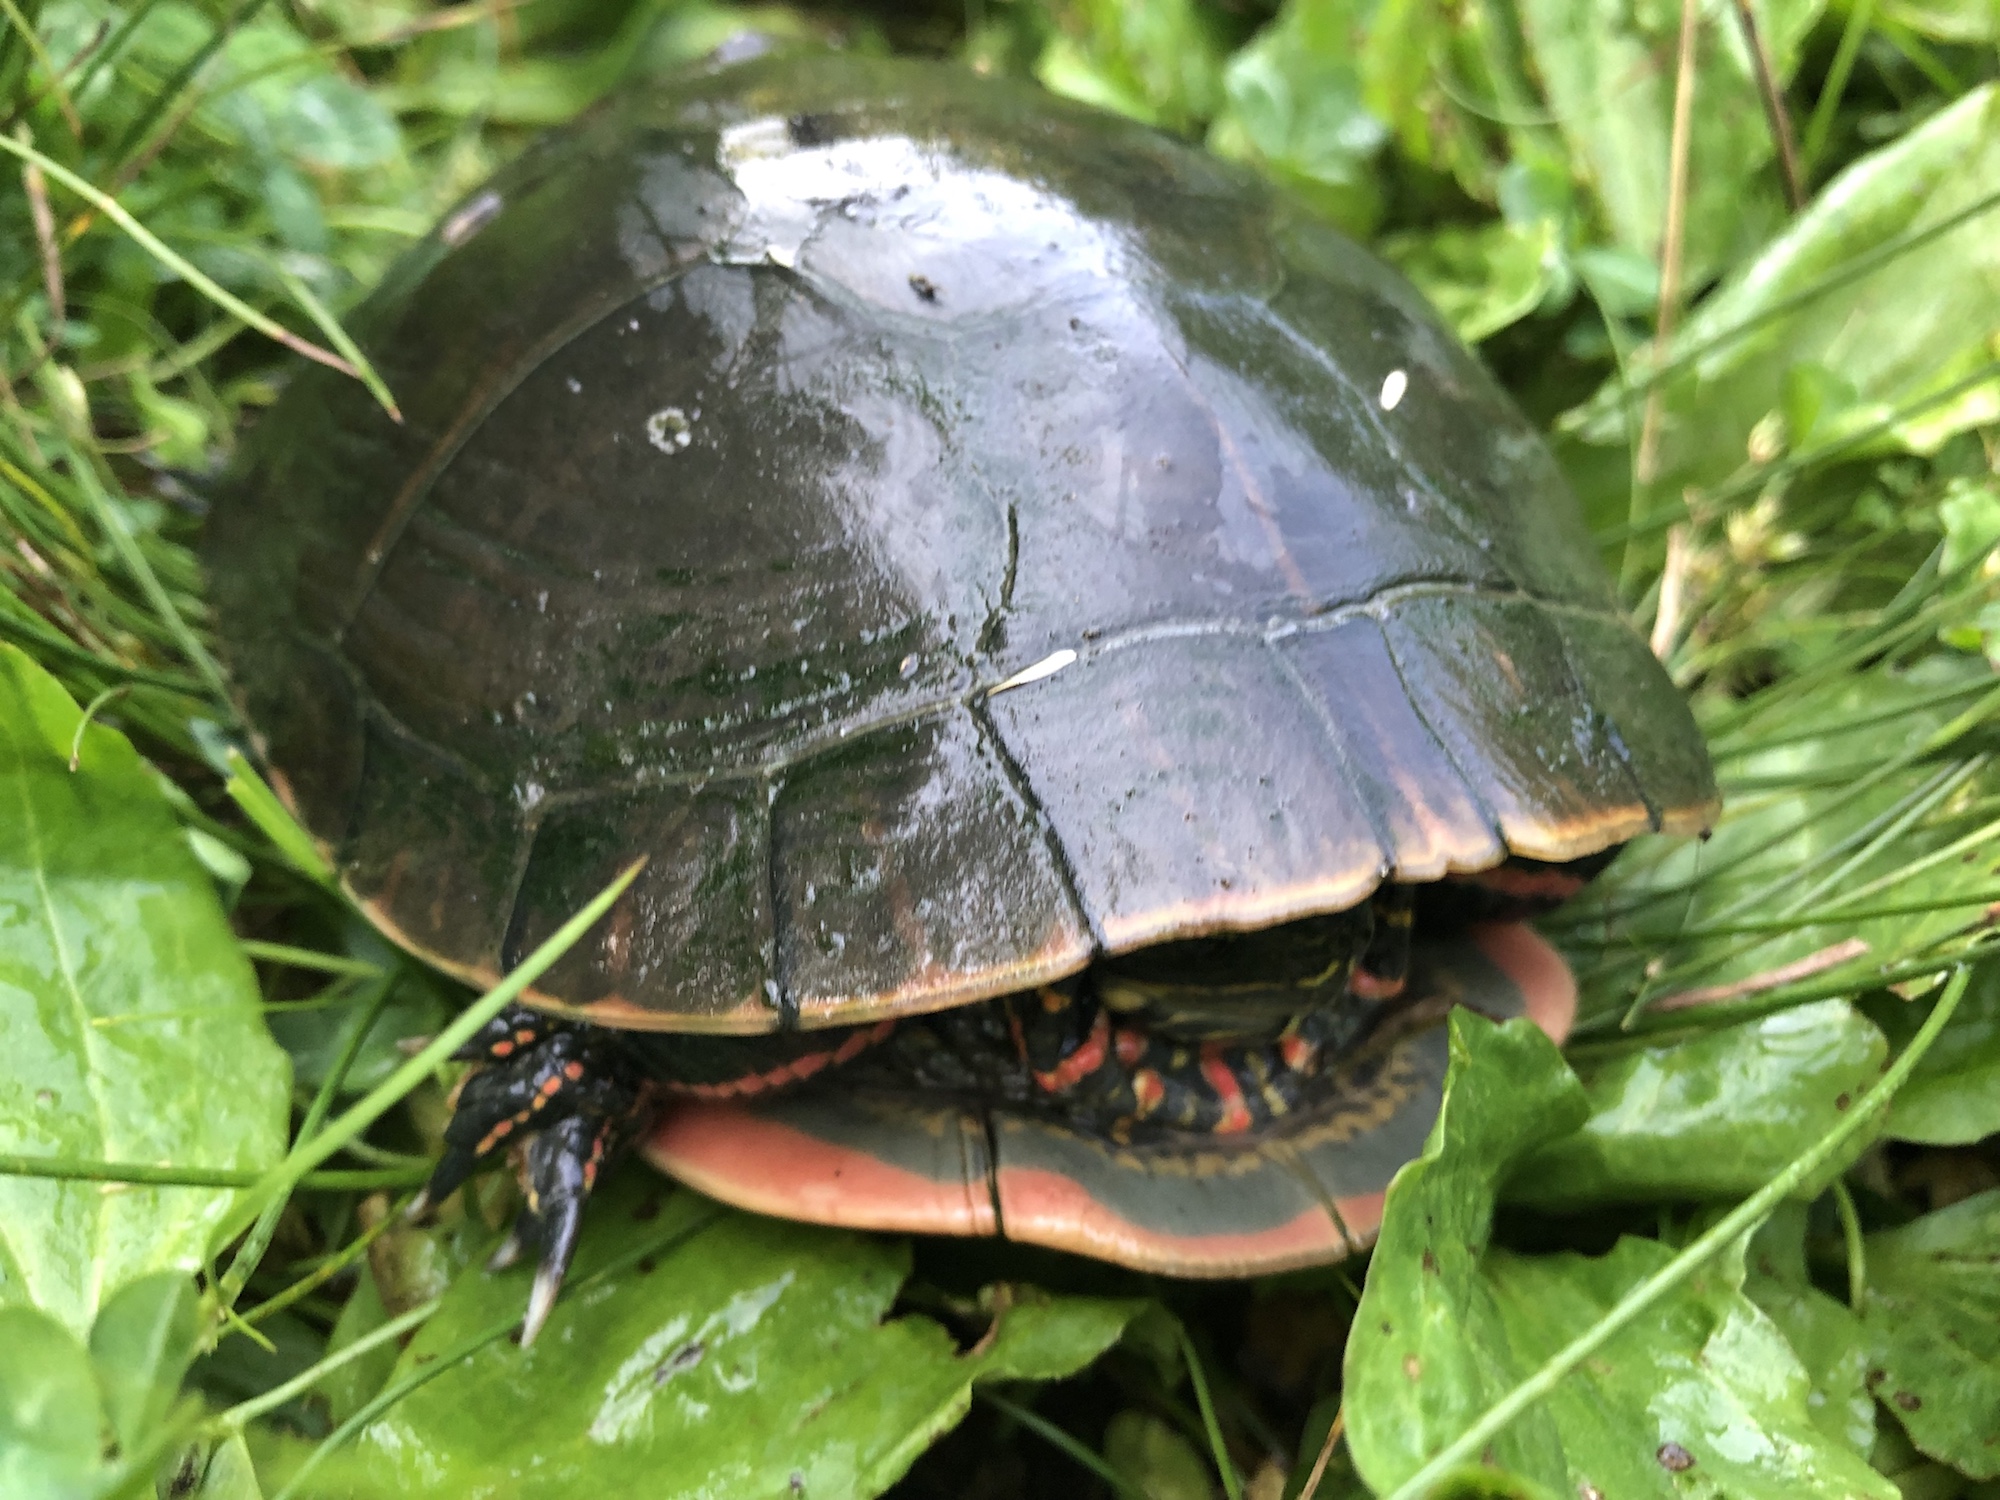 Painted Turtle near Marion Dunn Pond in Madison, Wisconsin on July 7, 2019.